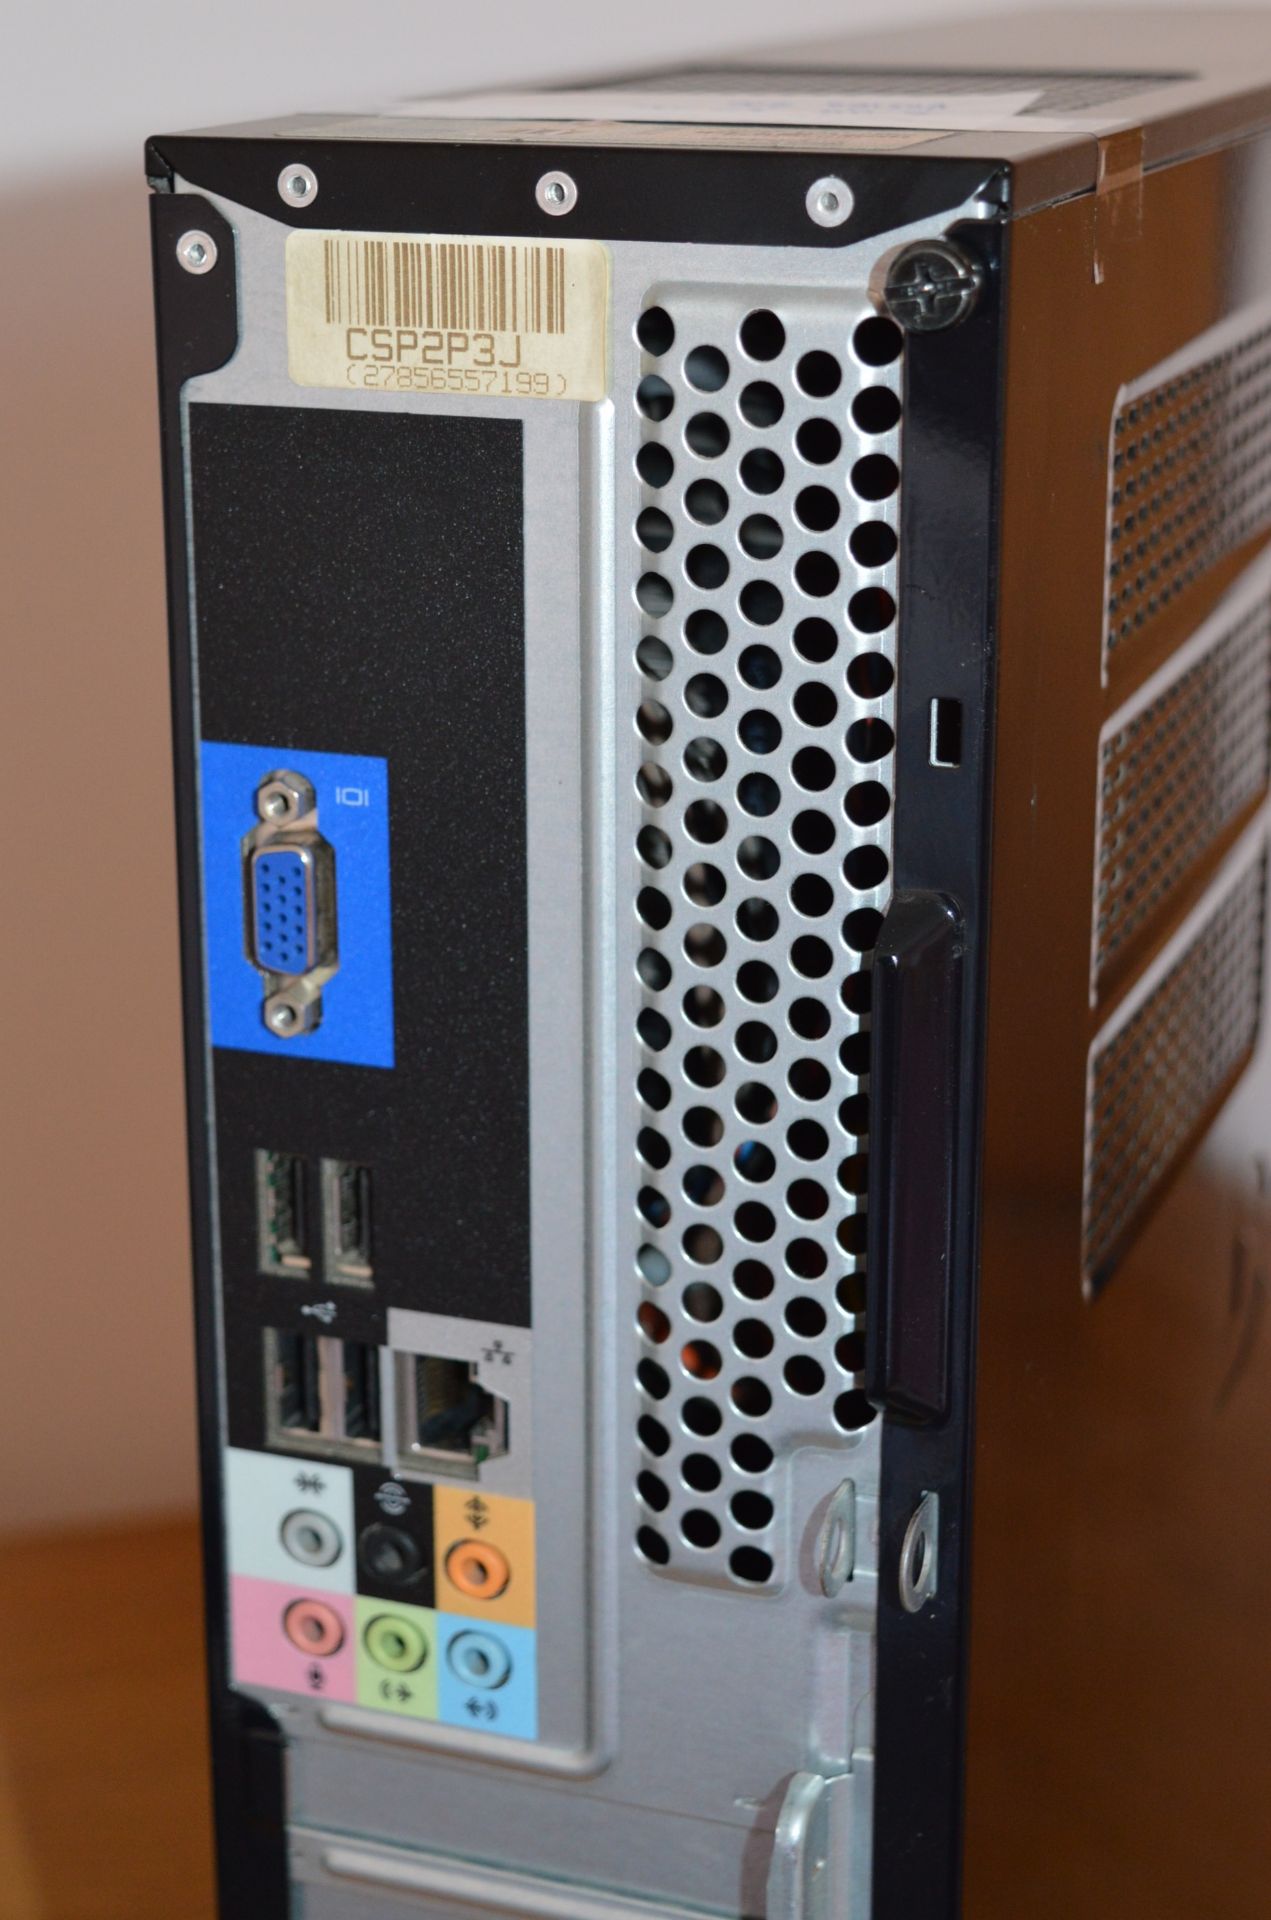 1 x Dell Vostro 220 Desktop Computer - Features Intel 2.0ghz Dual Core Processor, 2gb Ram and DVD - Image 4 of 4